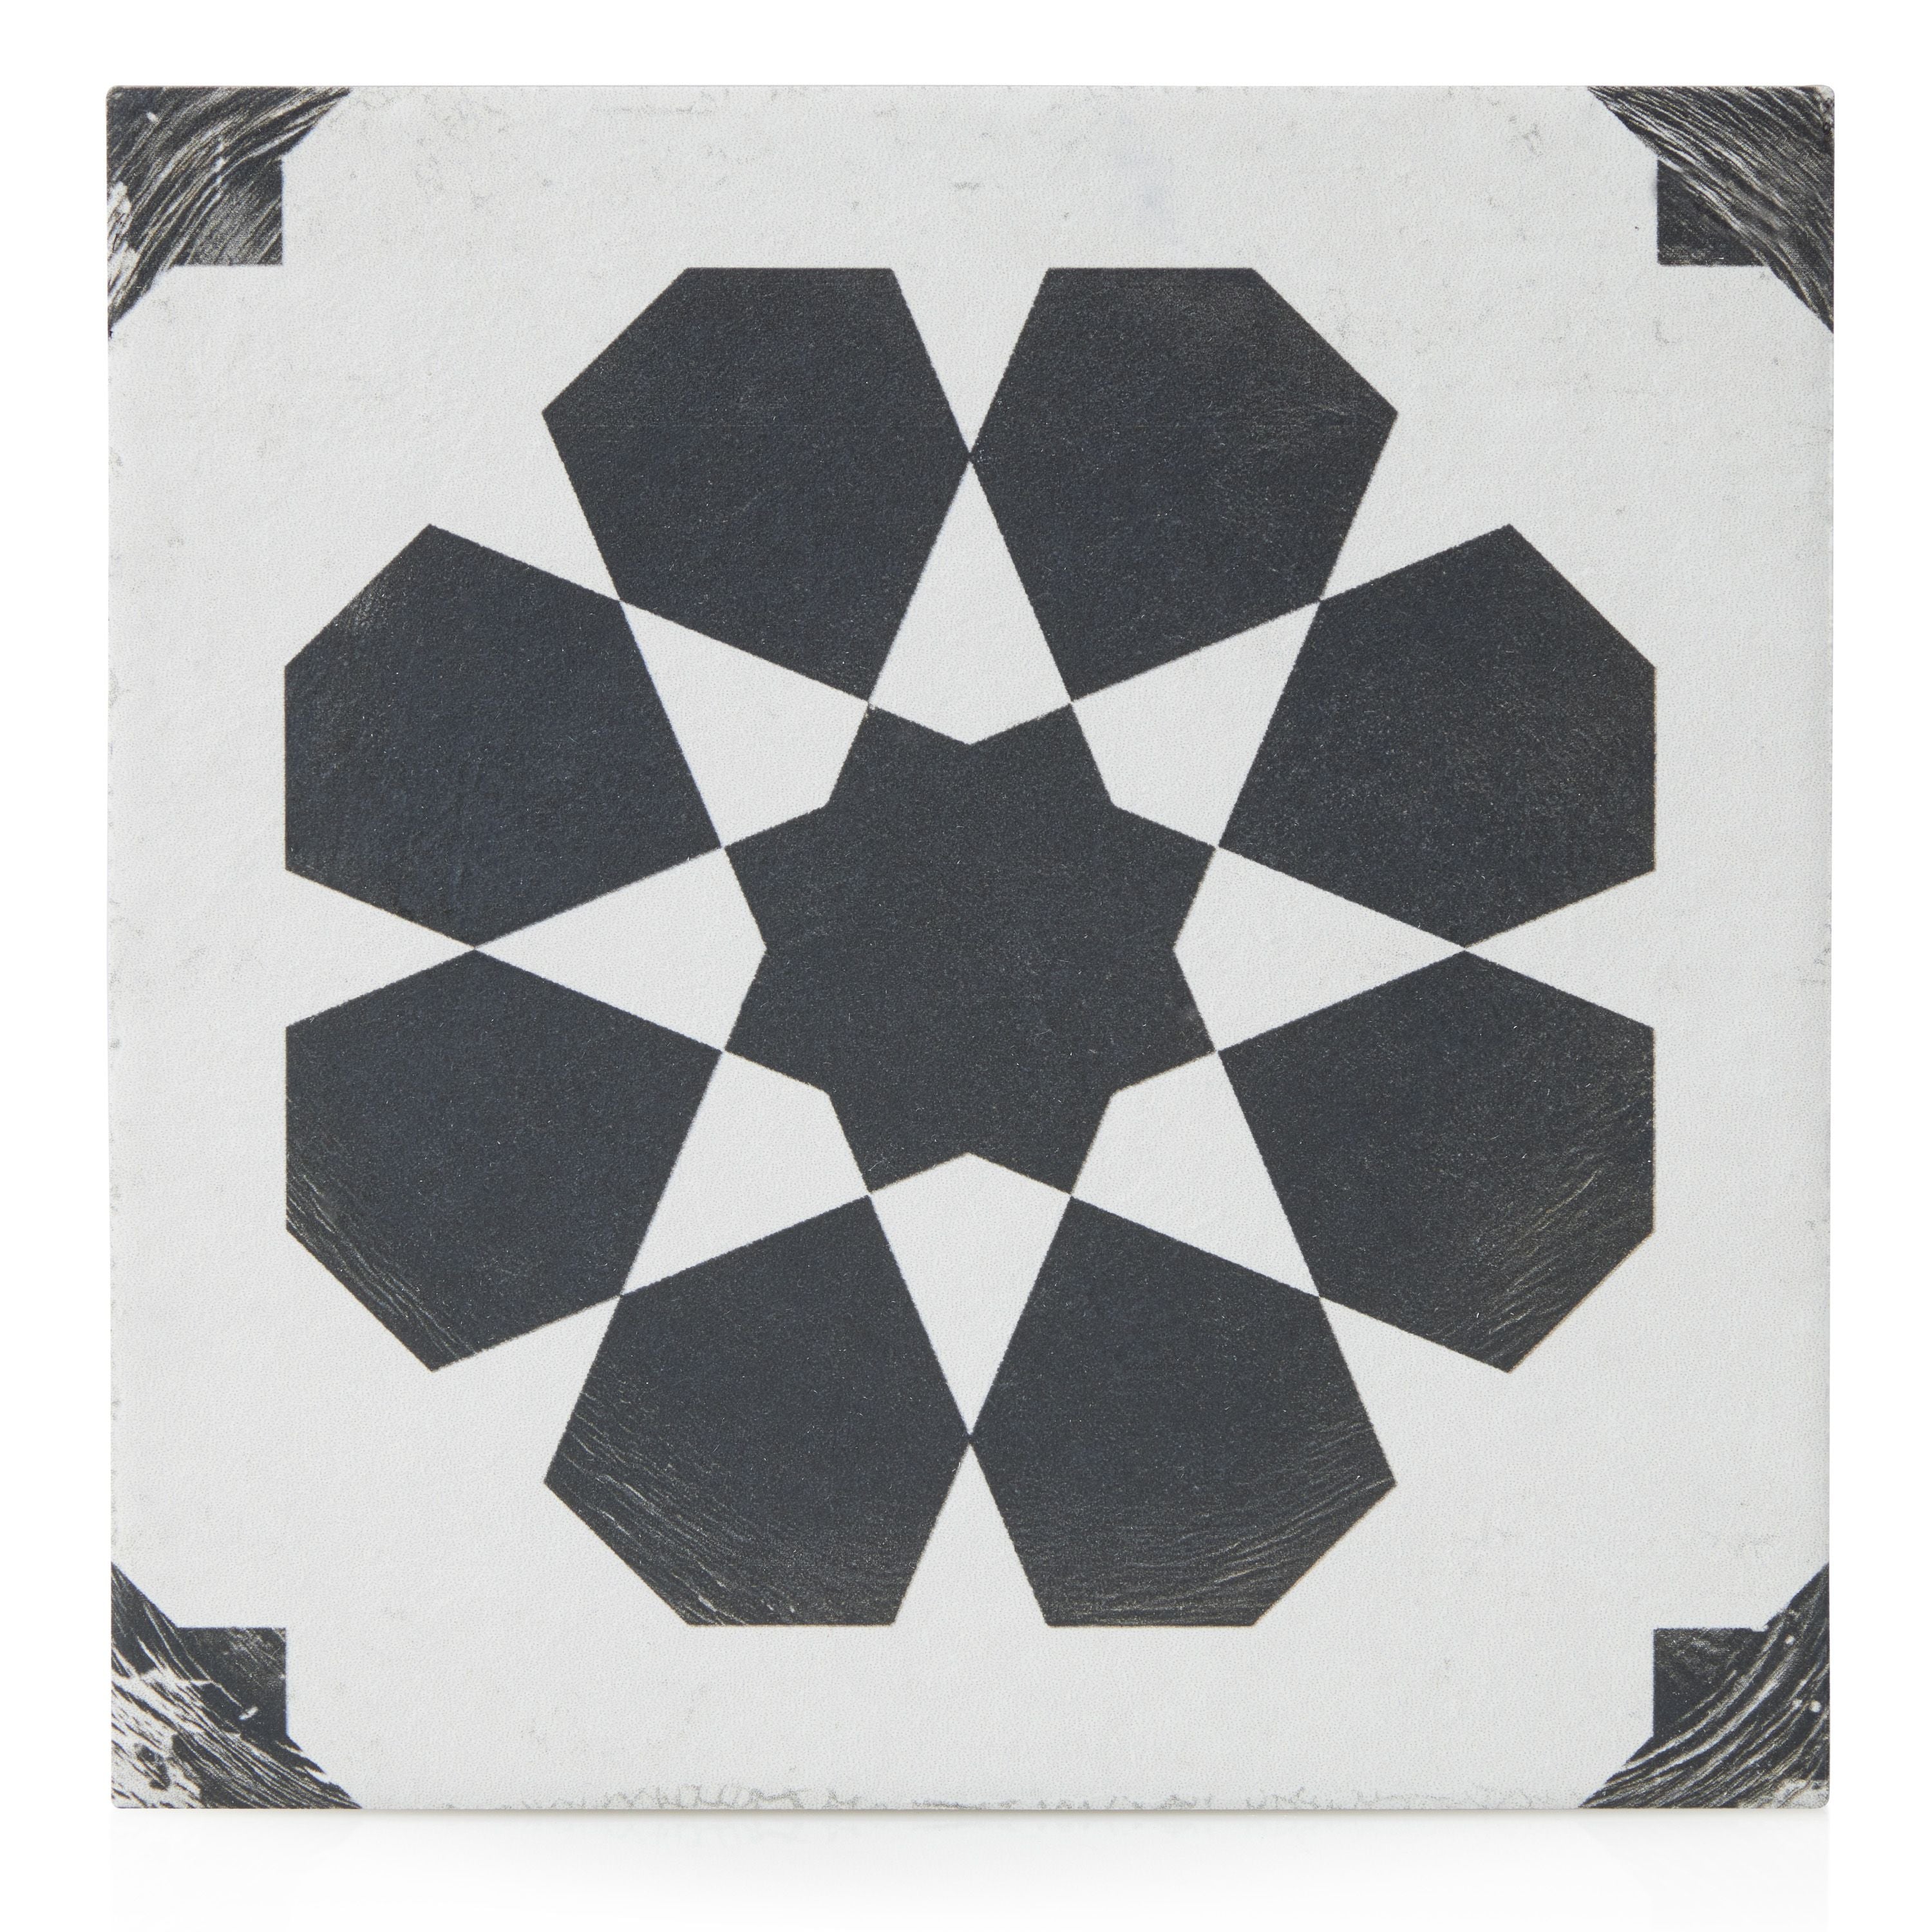 8x8 Black and White Distressed Cyclone porcelain tile - Industry Tile